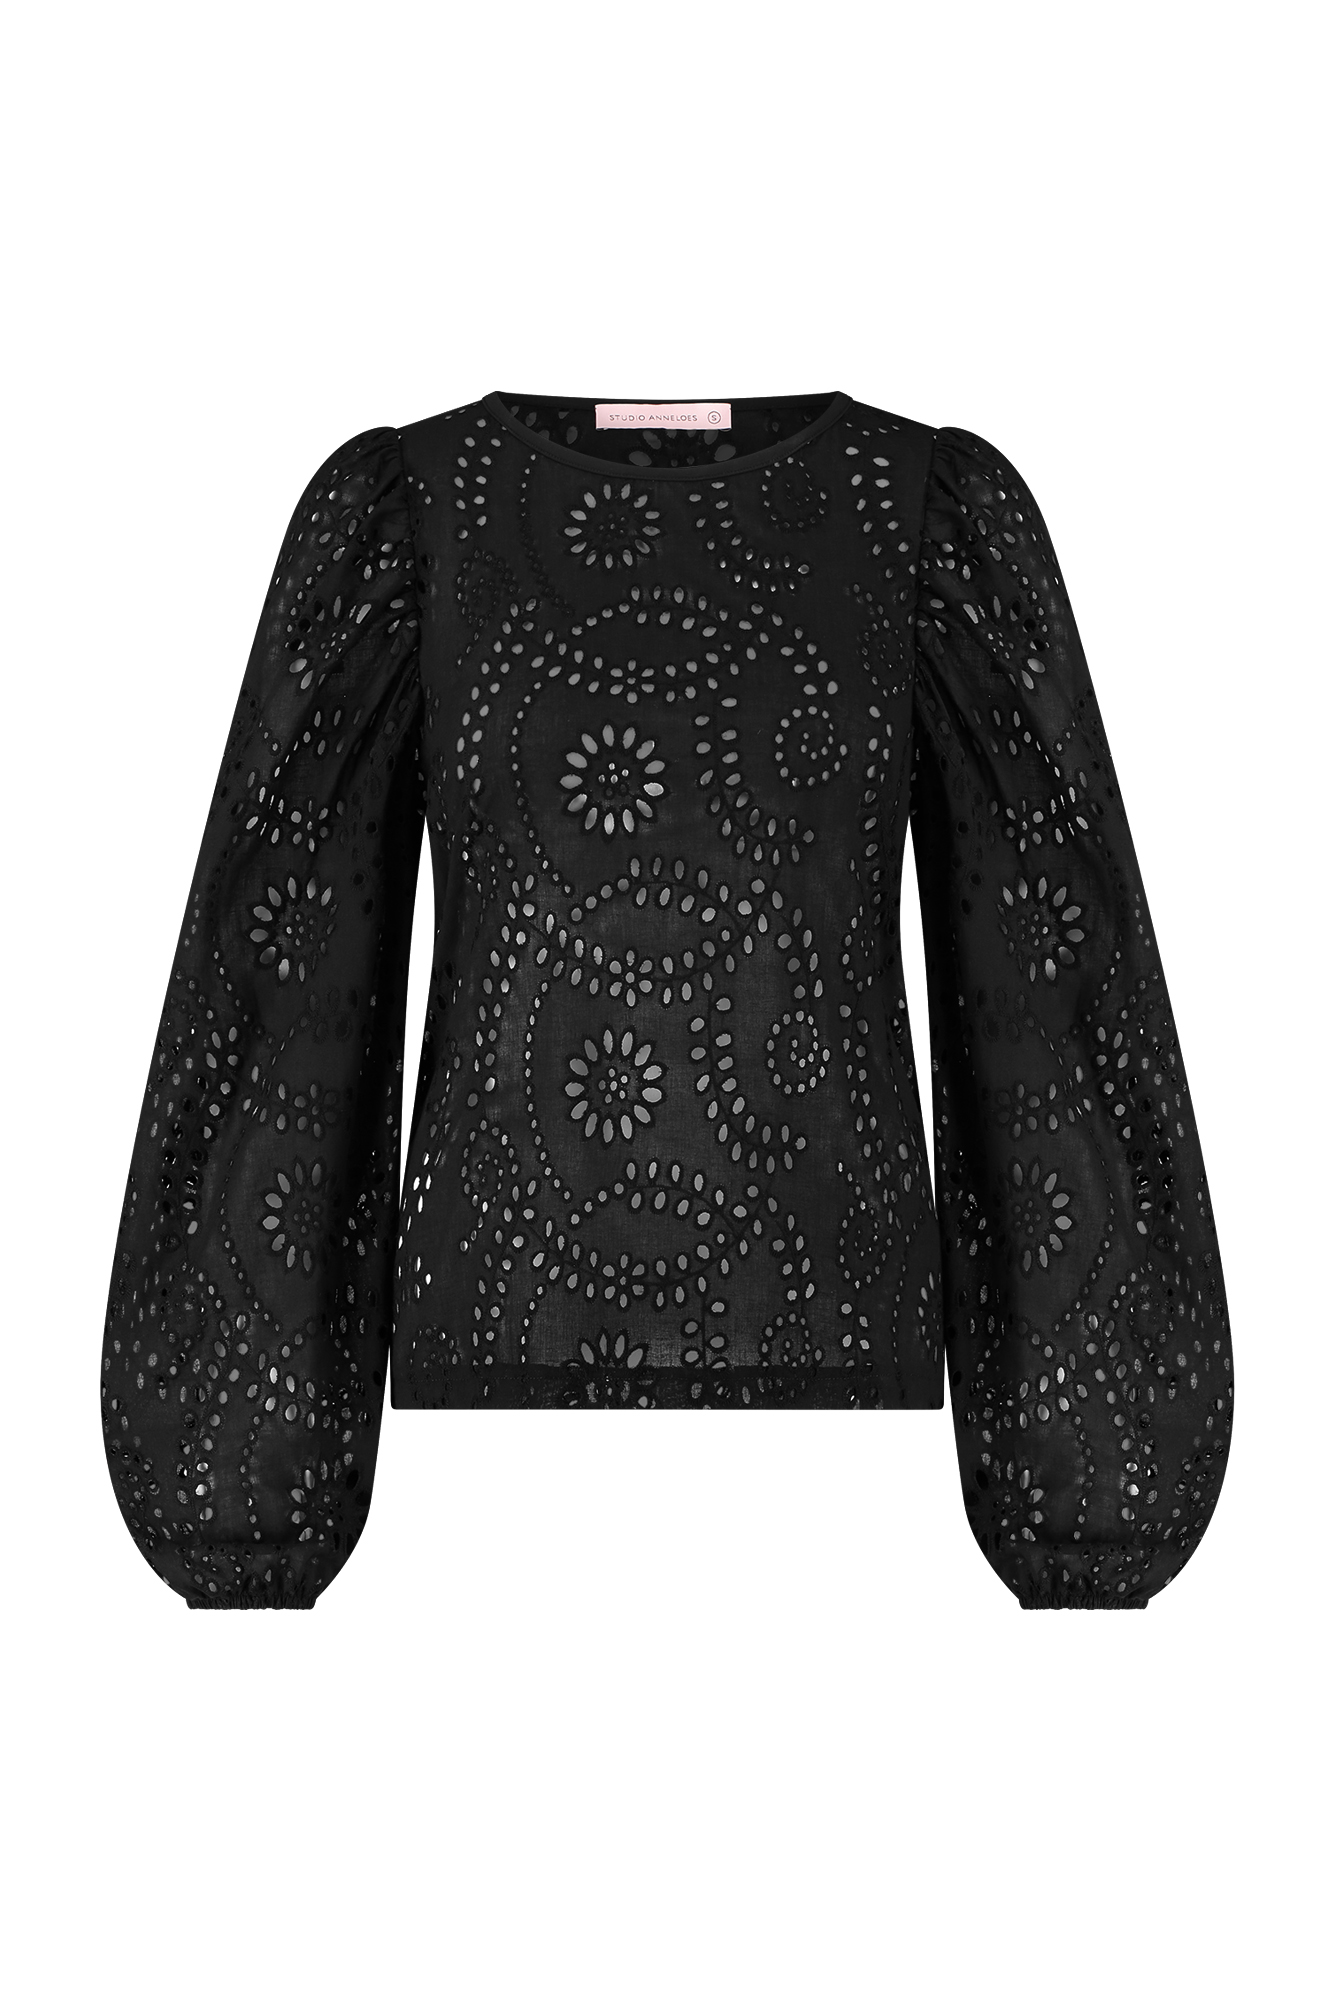 Studio Anneloes Roxy Embroidery Blouse Black